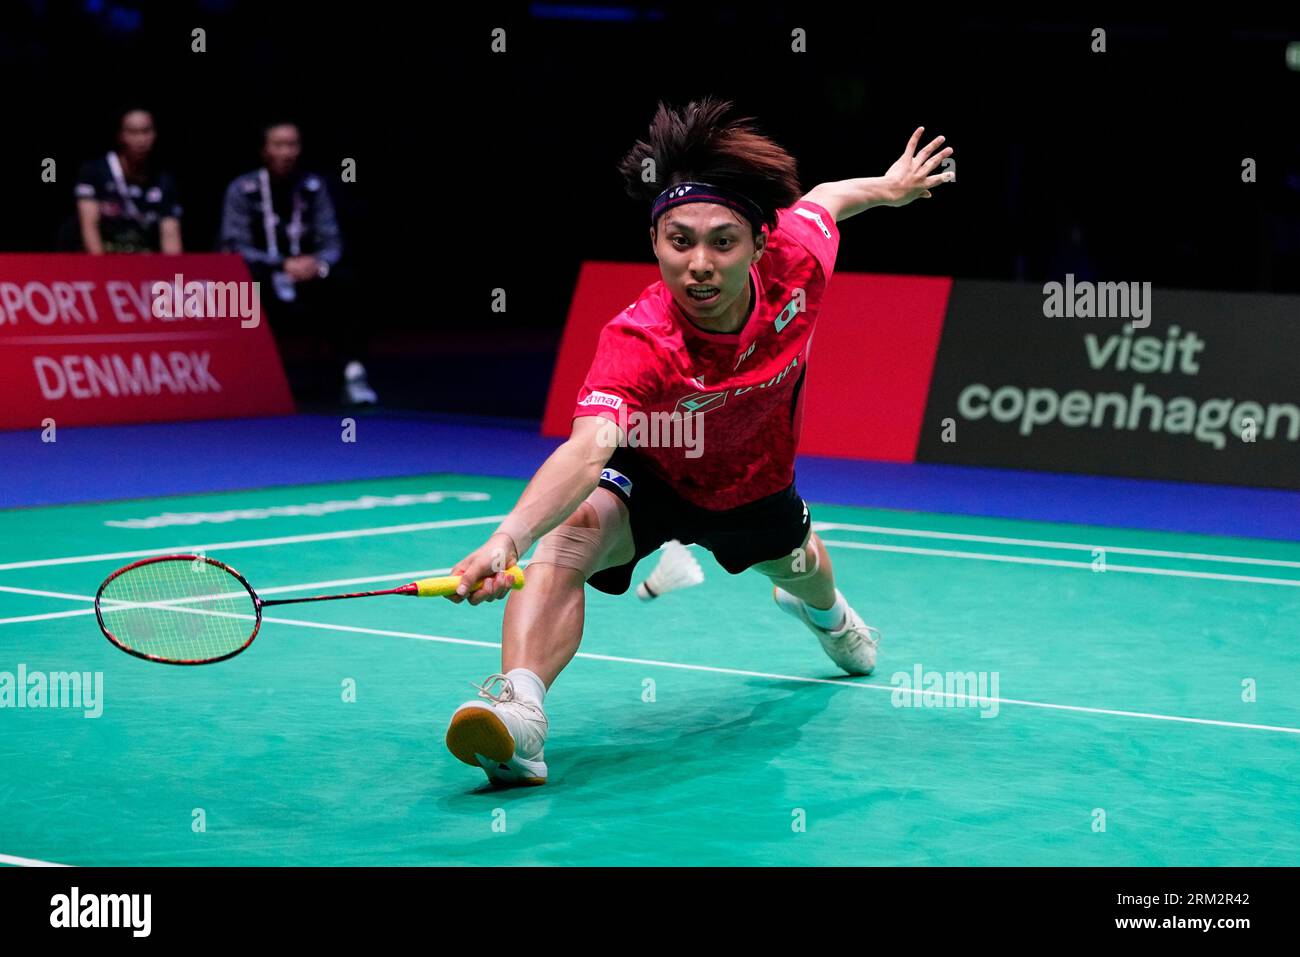 Kodai Naraoka of Japan plays against Anders Antonsen of Denmark during a semi-final mens single match at the Badminton World Federation World Championship in Royal Arena in Copenhagen, Denmark, on Saturday, Aug.